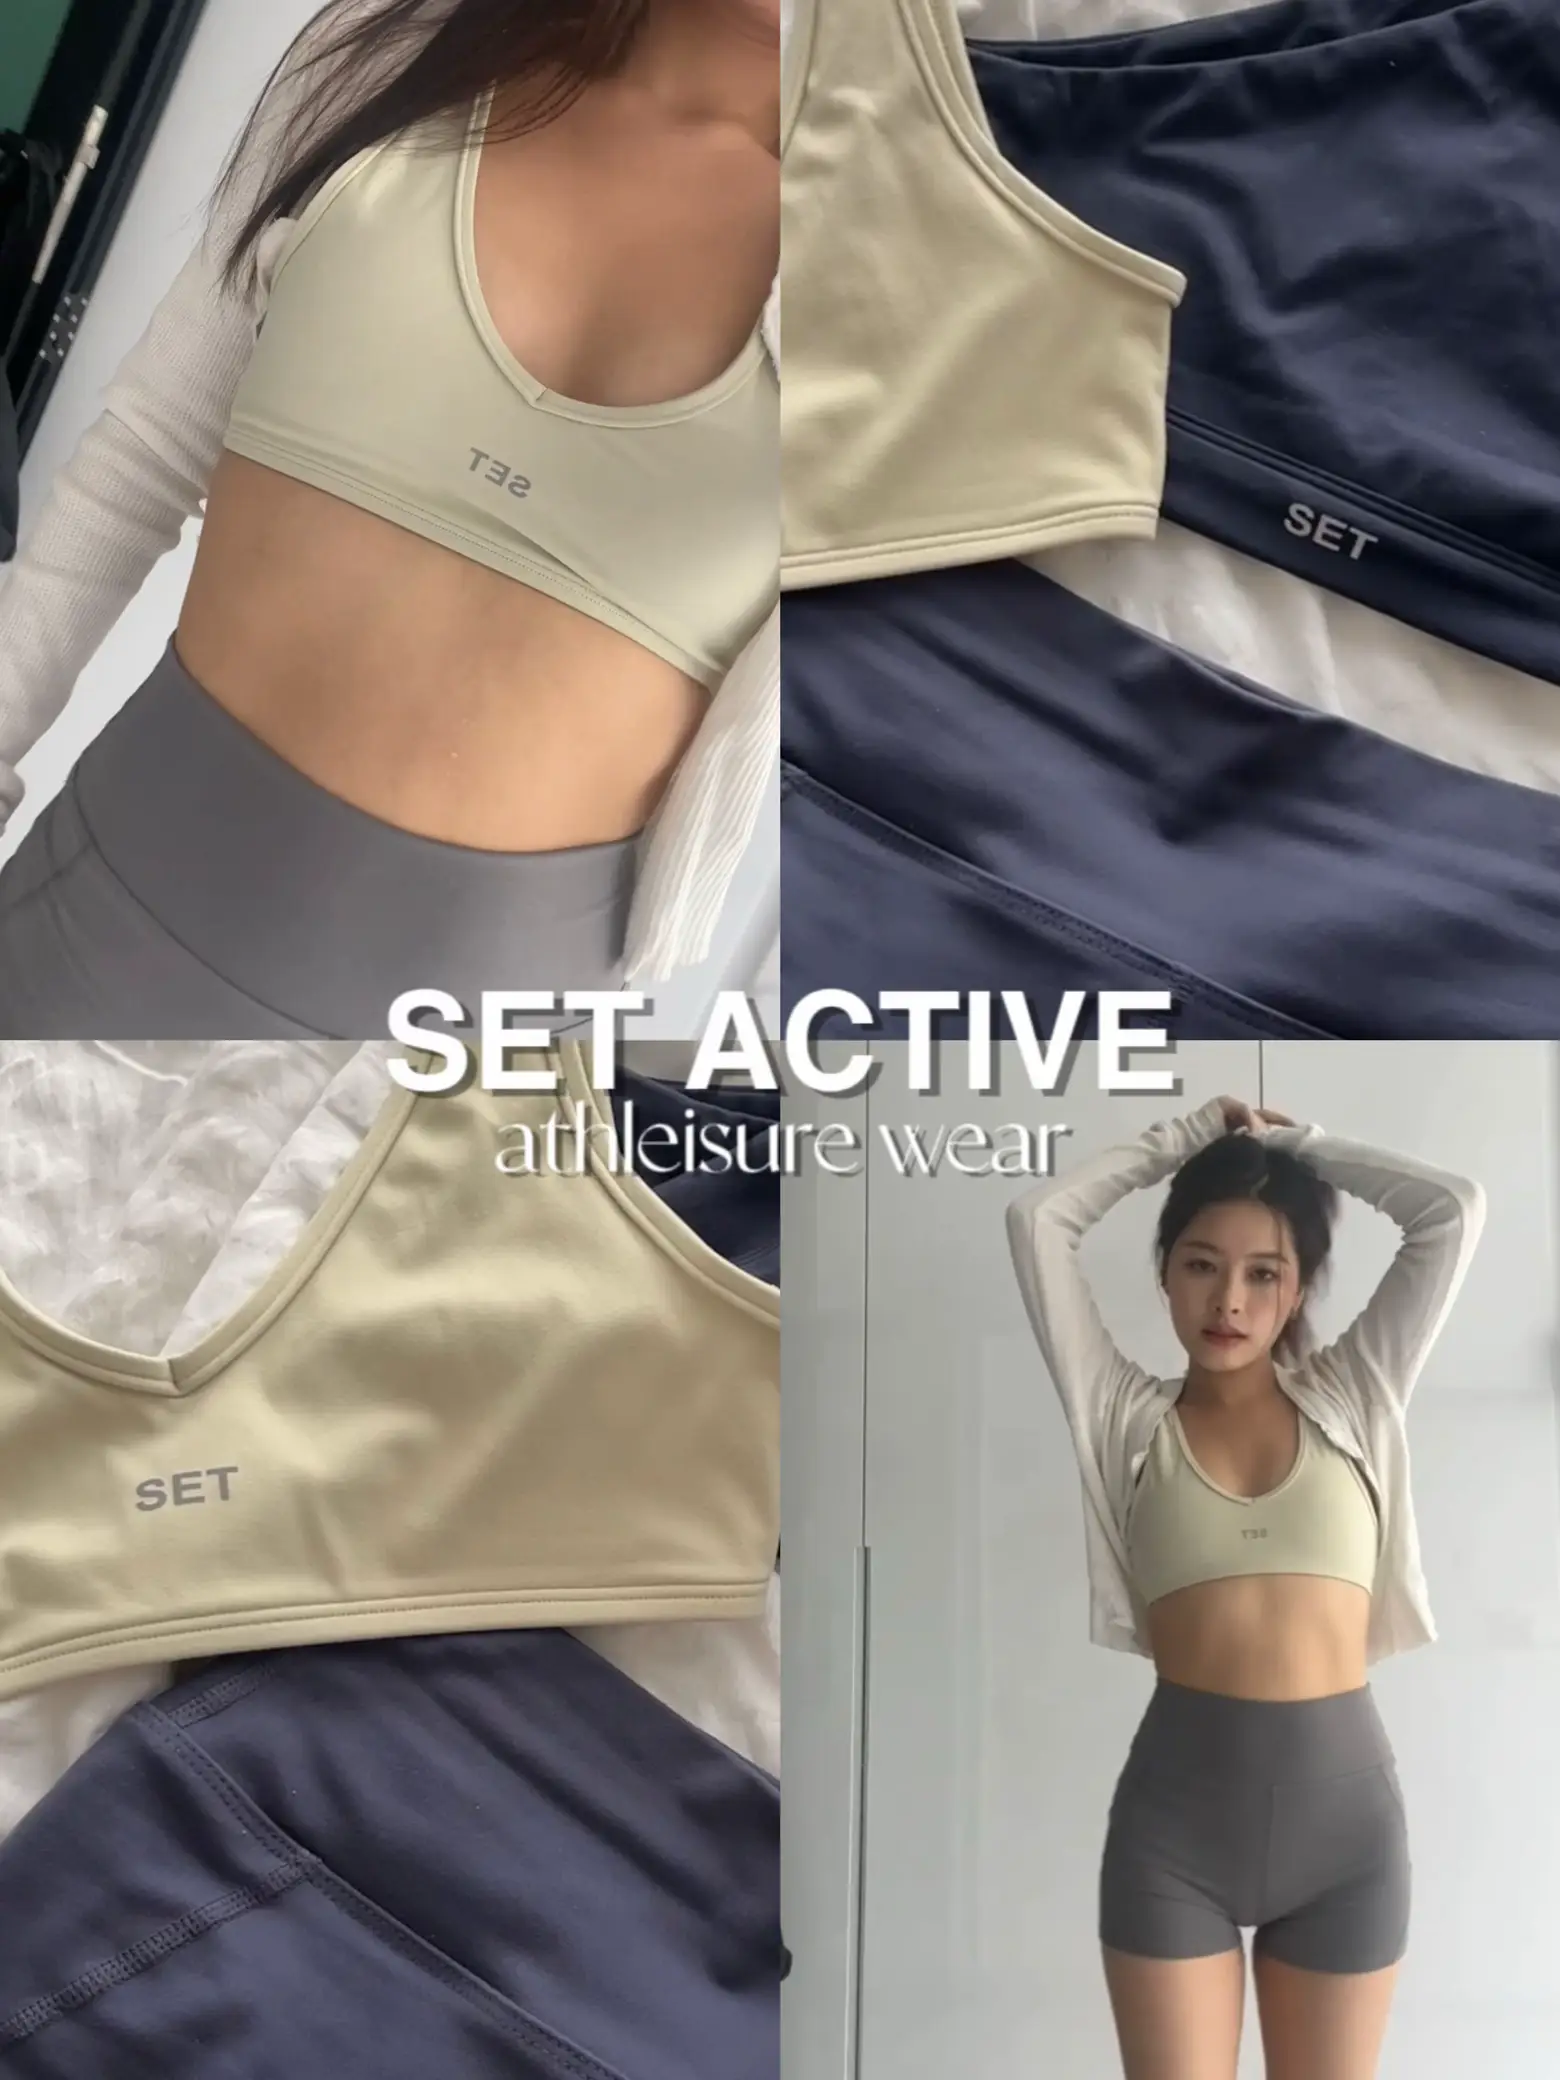 my favourite active wear brand atm!